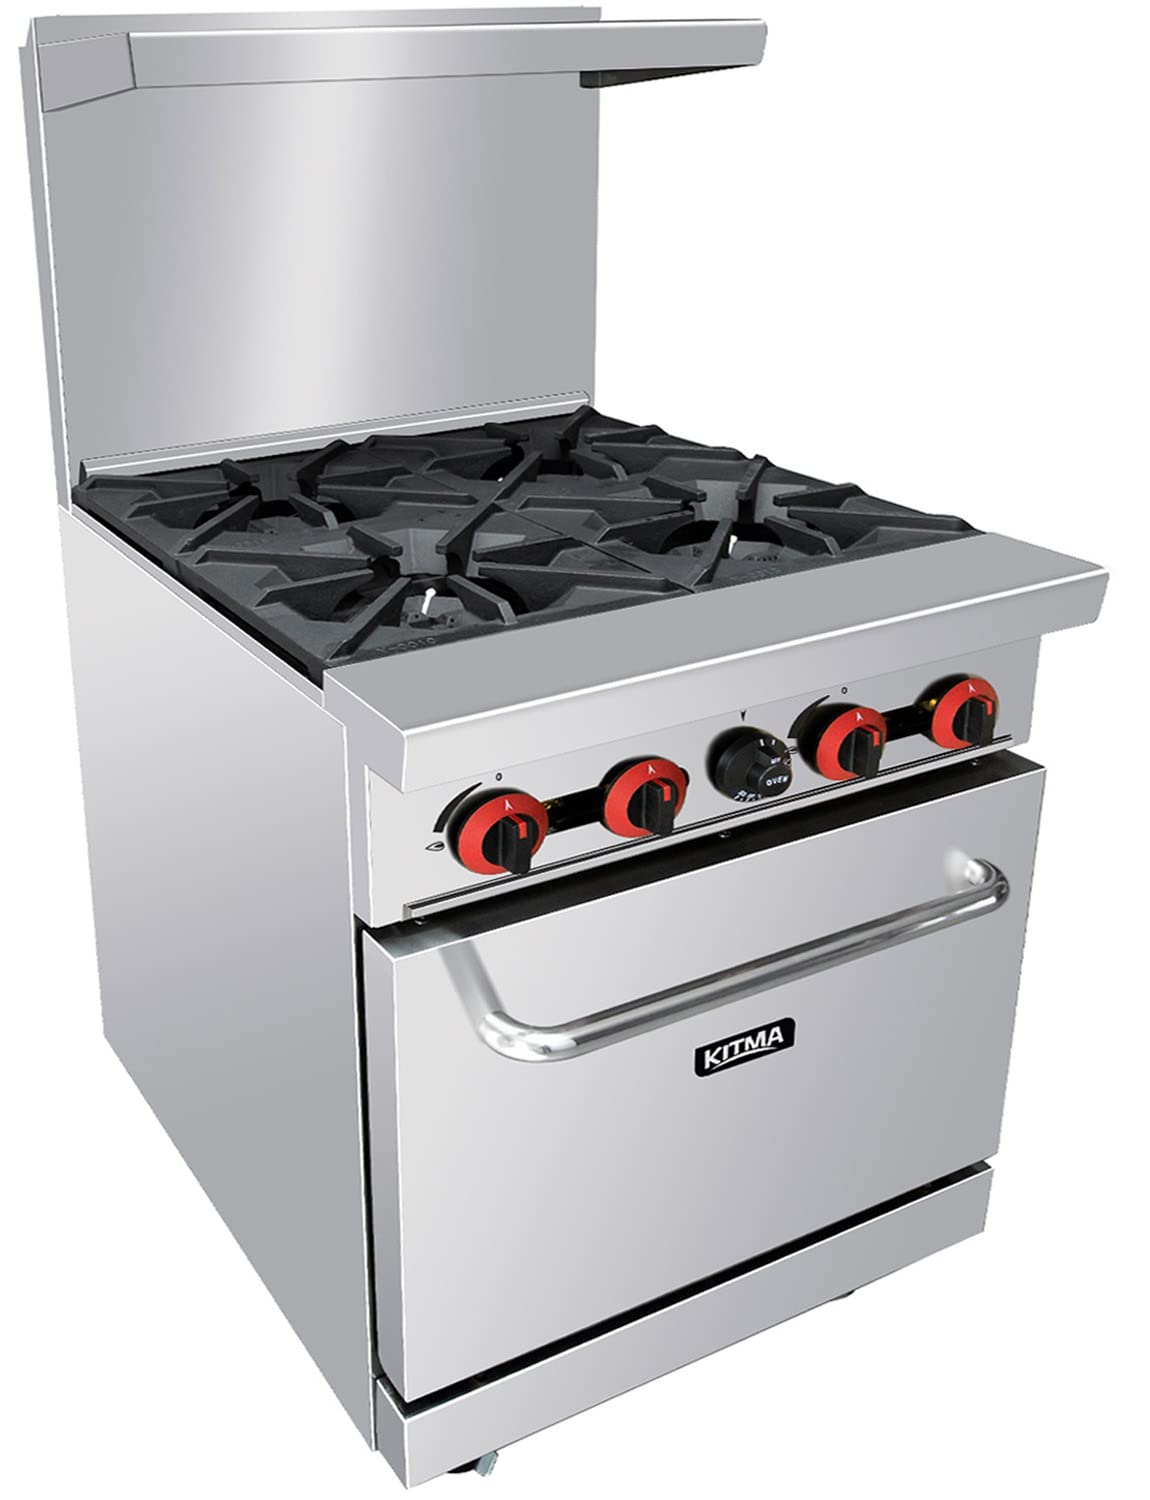 KITMA commercial gas Range, 4 Hot Plates Burner Heavy Duty Range with 1 Standard Oven, 24 in. Liquefied Propane Range cooking Pe